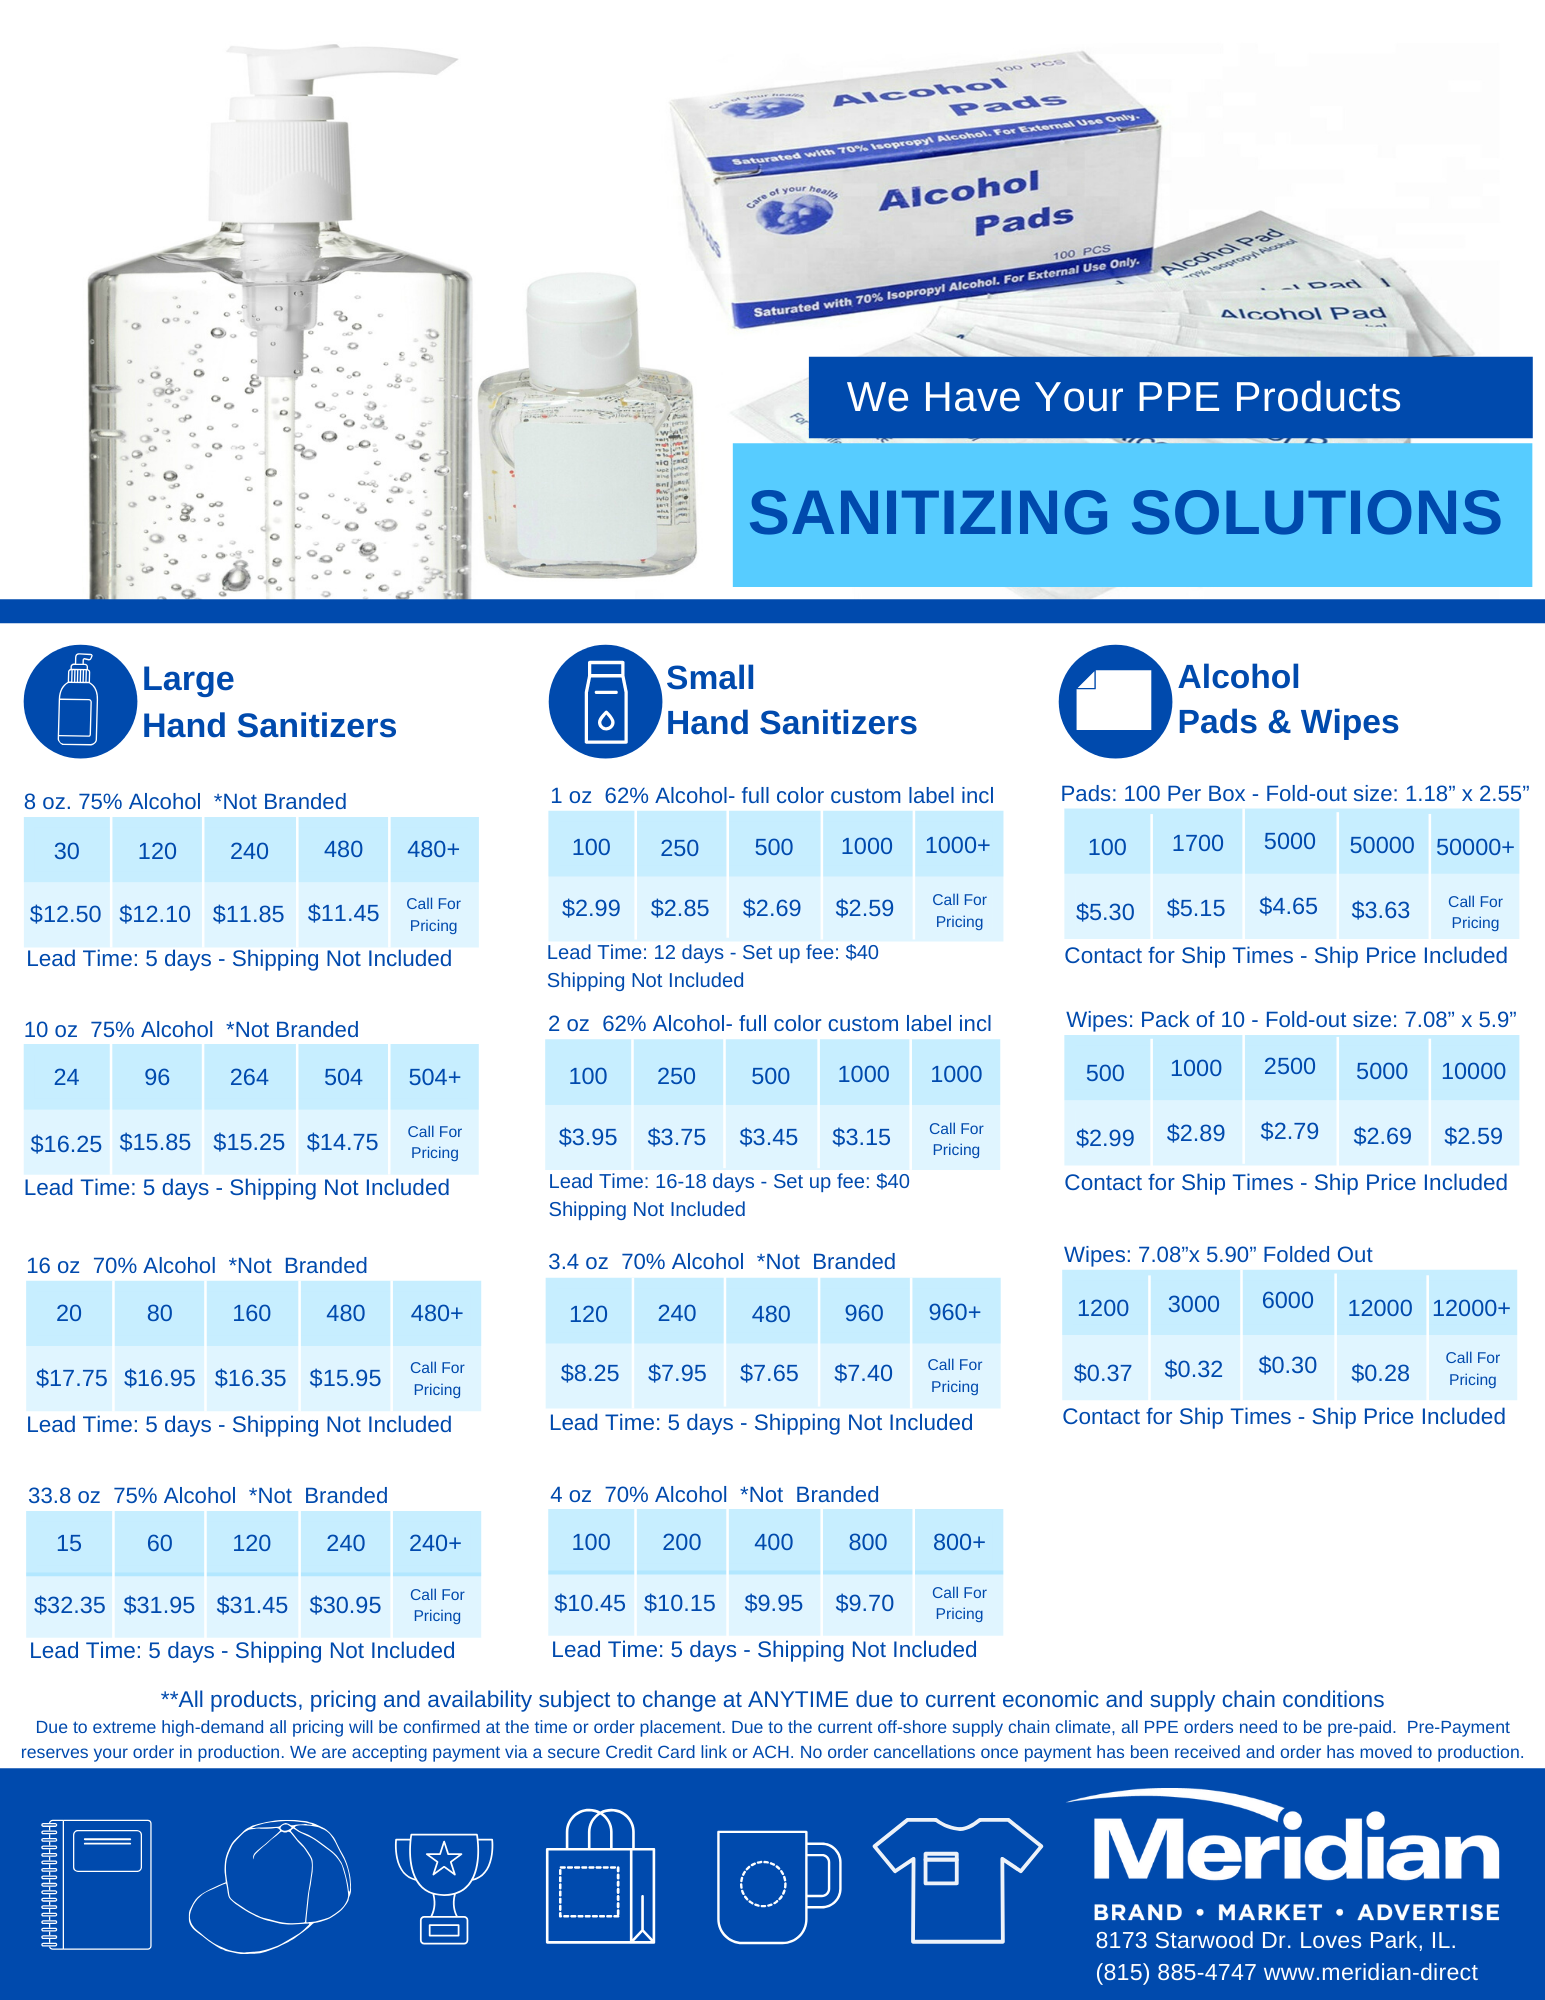 Meridian-Sanitizing-Solutions-Products